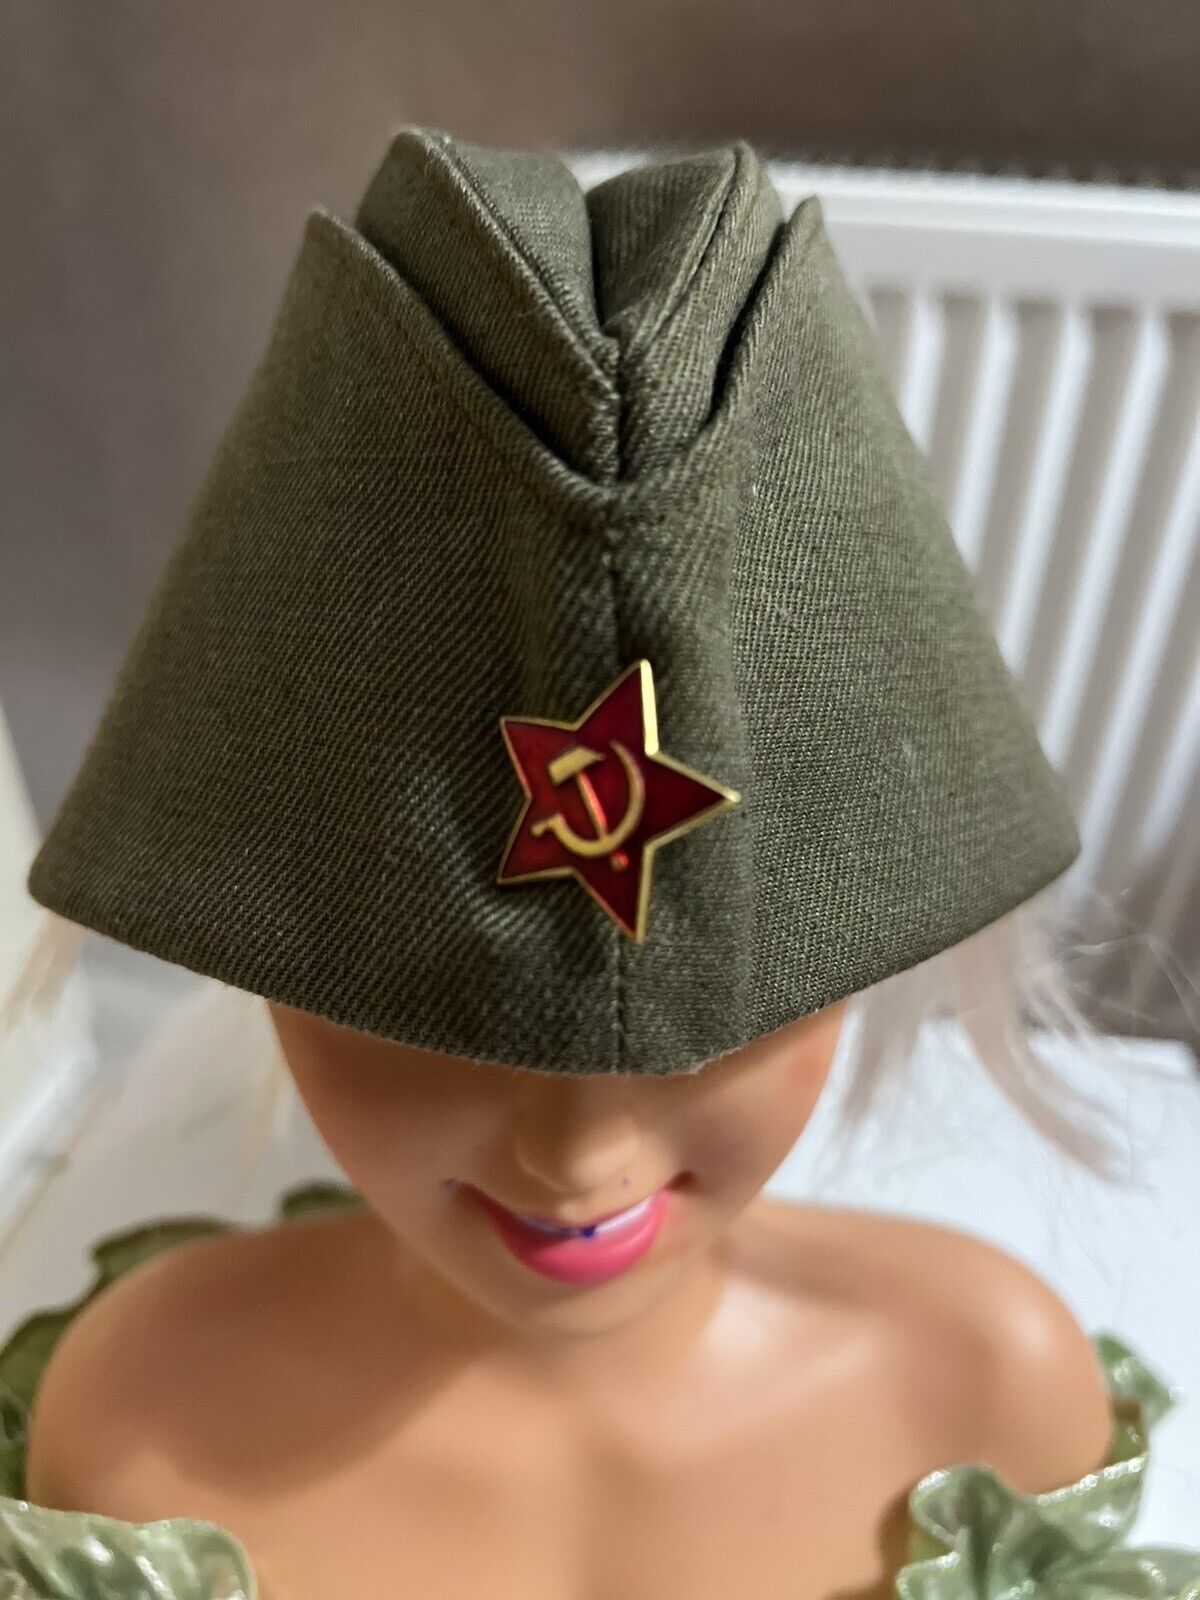 Military pilotka of a Soviet soldier from the USSR army with a red star